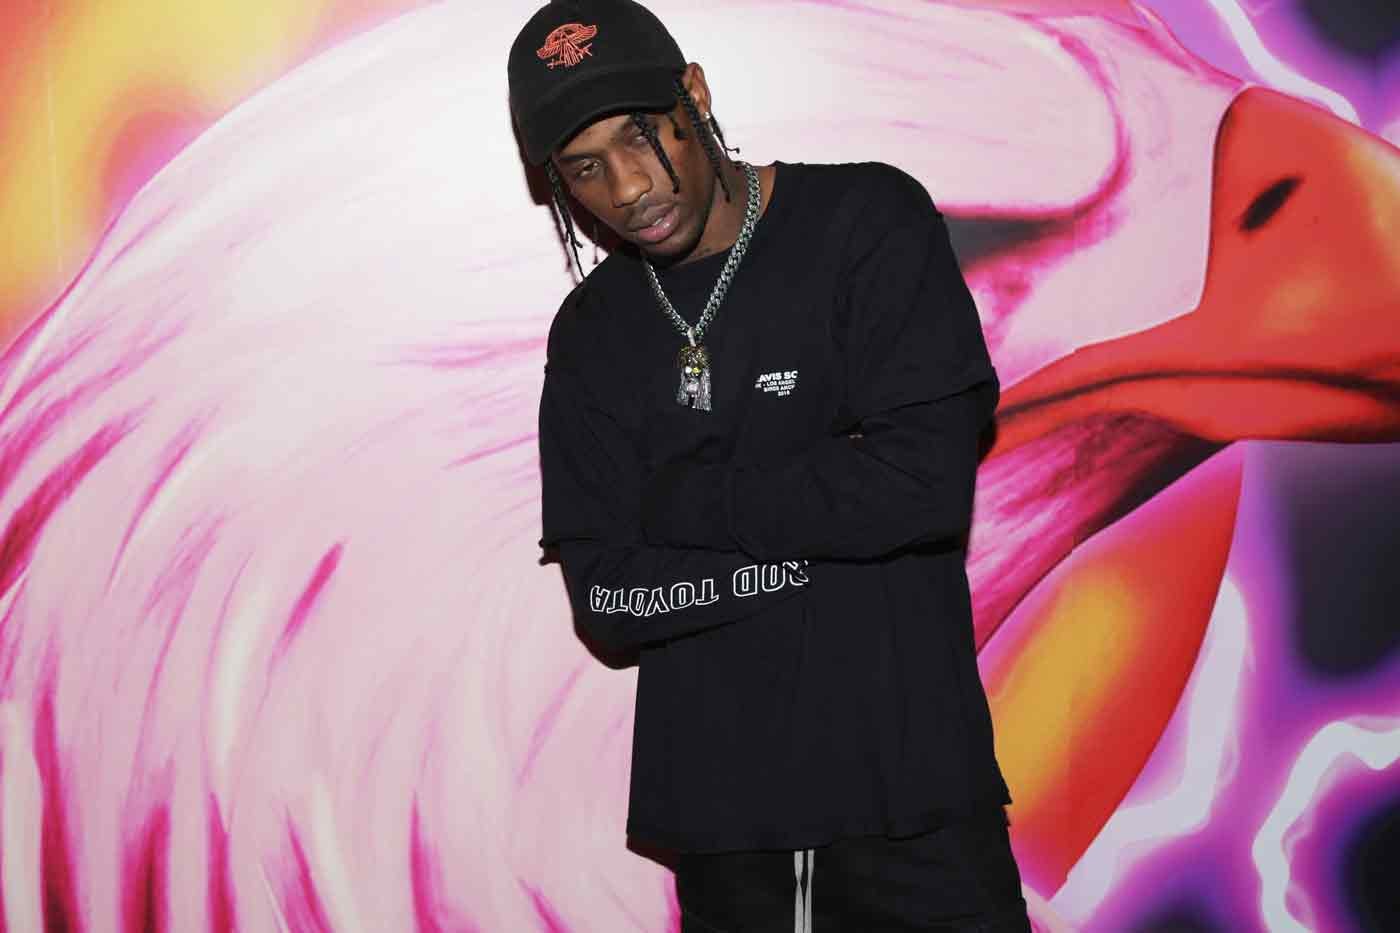 Travi$ Scott Shares a Snippet of The Weeknd's Kanye West-Produced Track